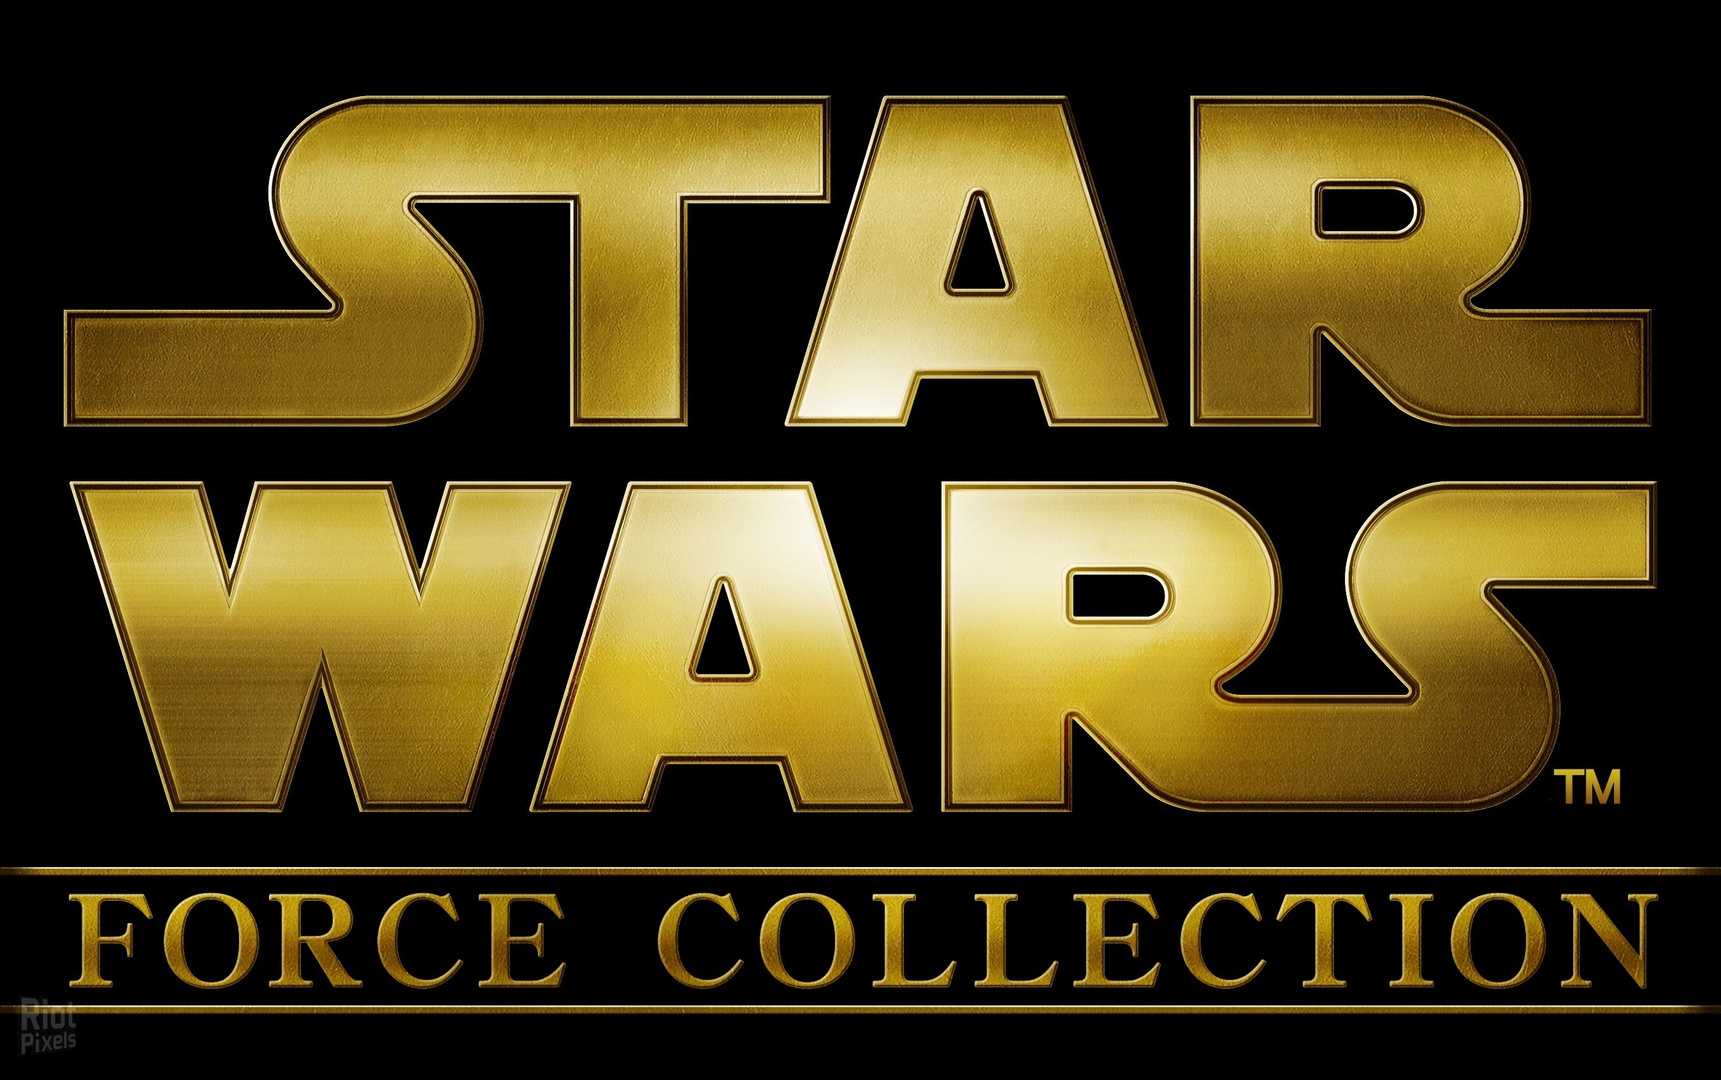 artwork.star-wars-force-collection.1721x1080.2013-08-21.6